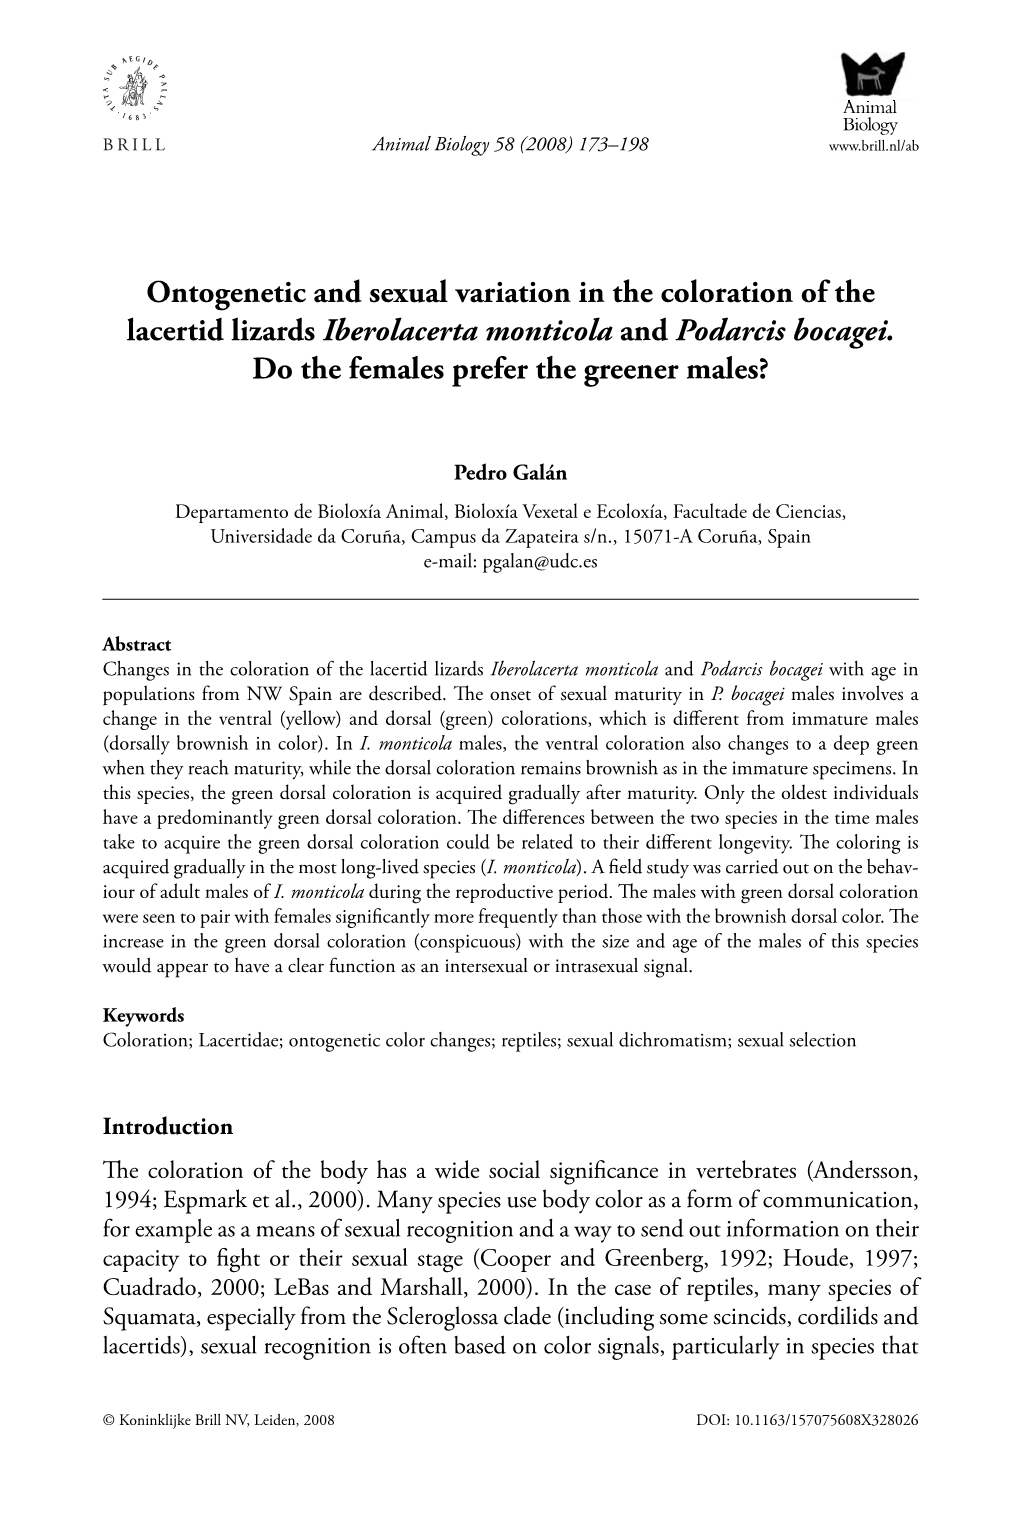 Ontogenetic and Sexual Variation in the Coloration of the Lacertid Lizards Iberolacerta Monticola and Podarcis Bocagei